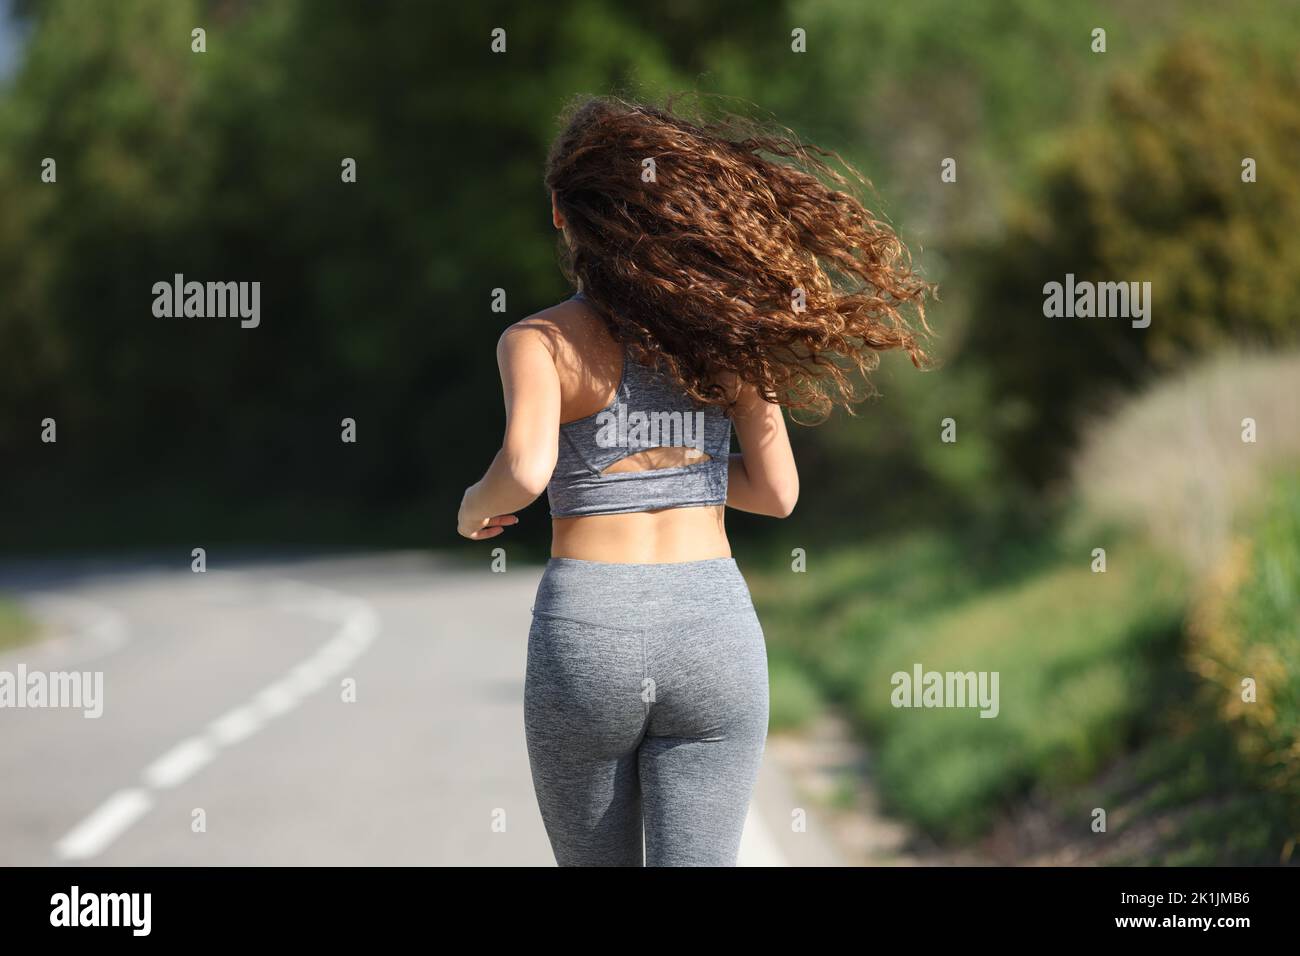 Back view portrait of a woman running in a road Stock Photo